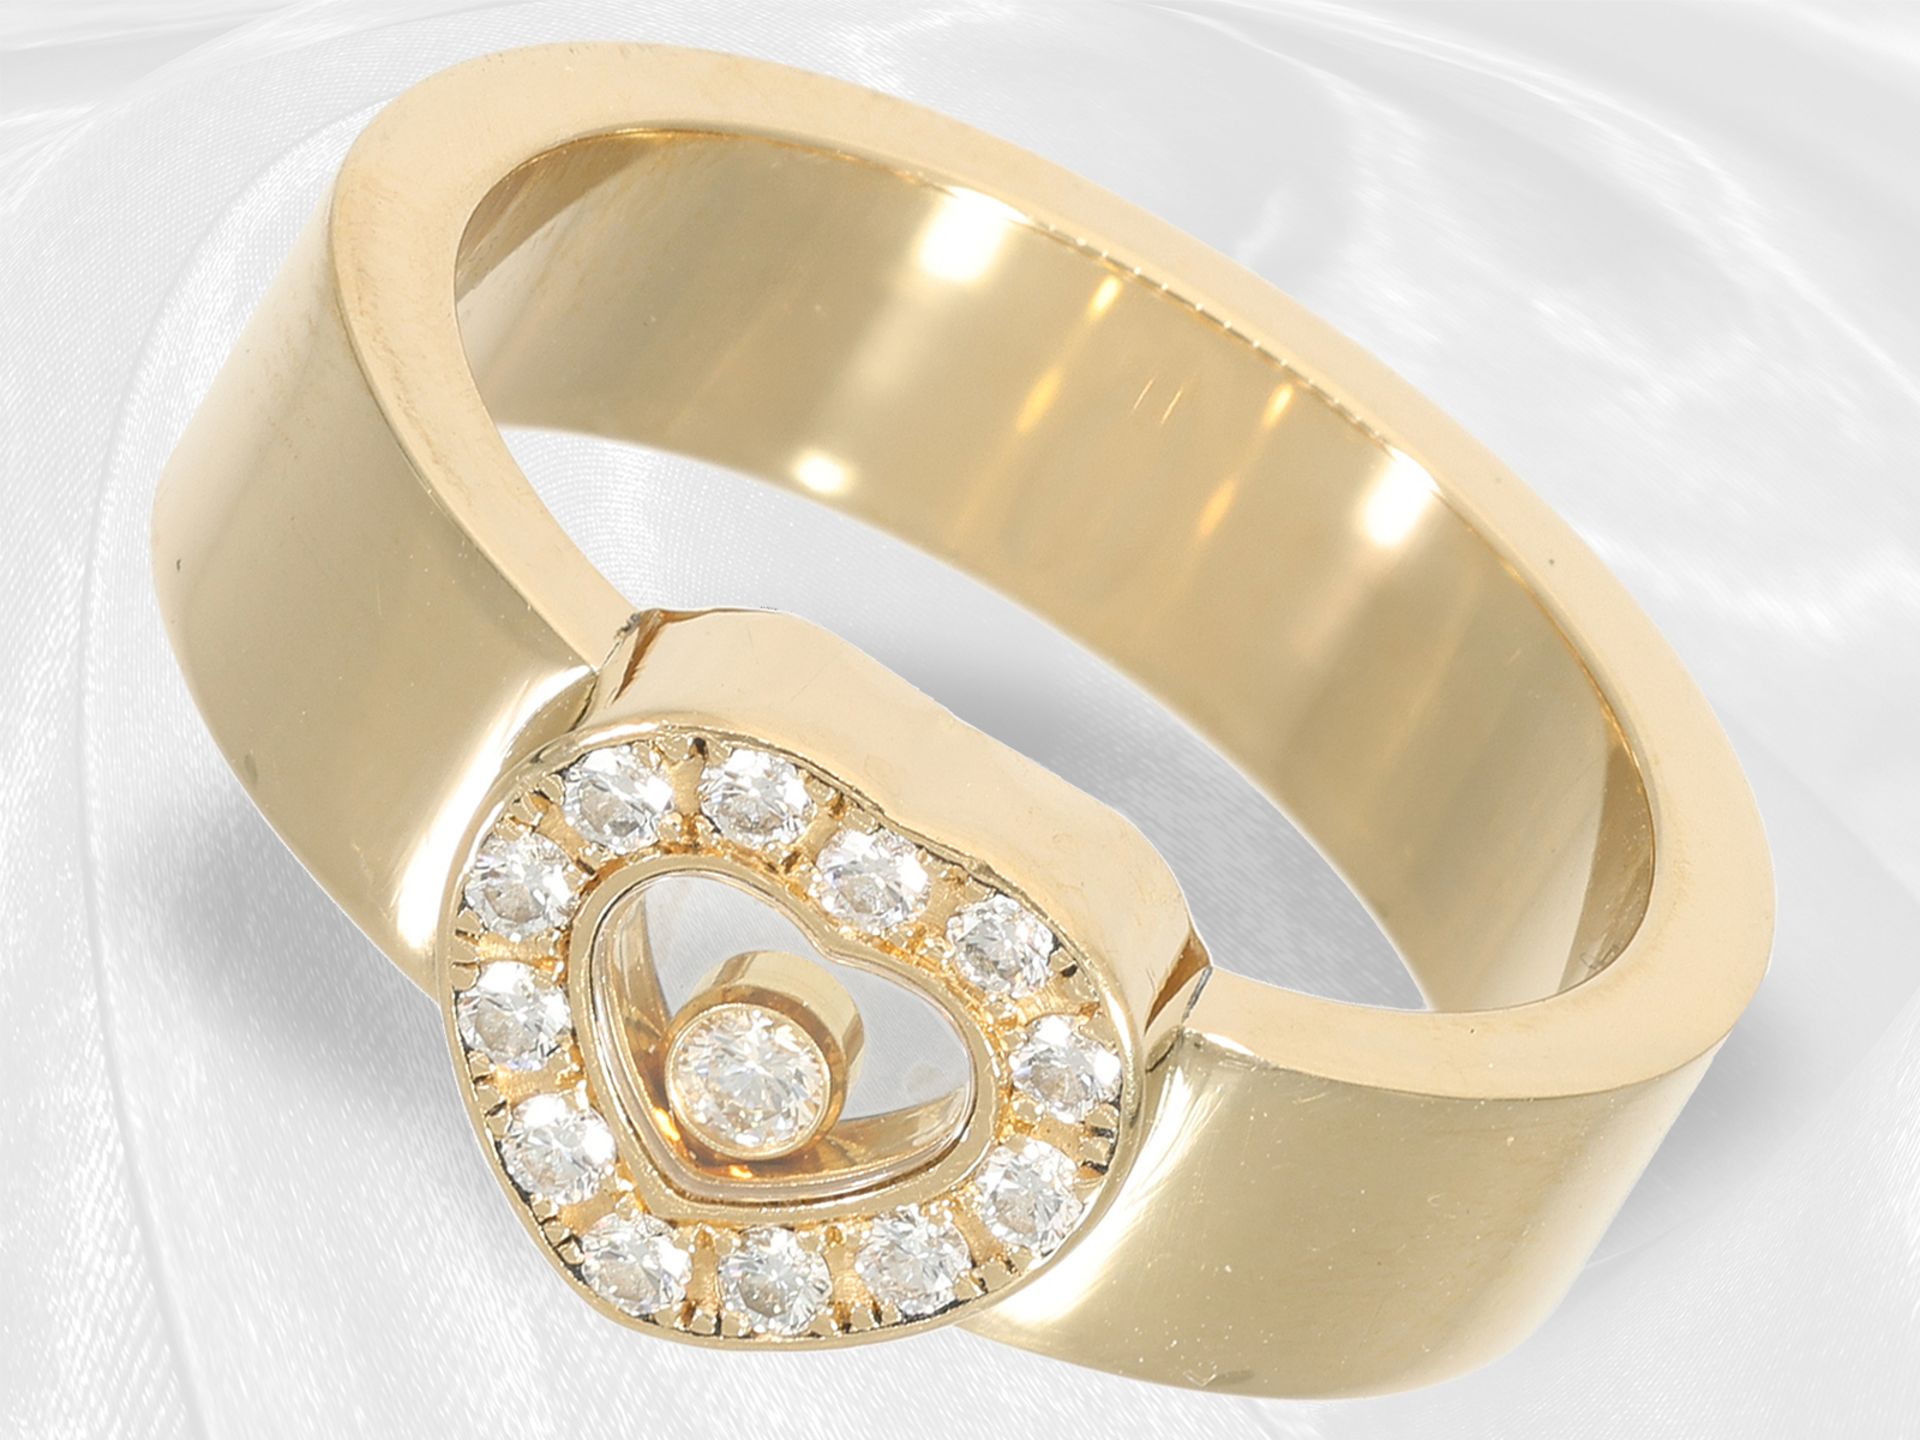 High quality Chopard ring "Happy Diamonds" with Chopard certificate, 18K yellow gold